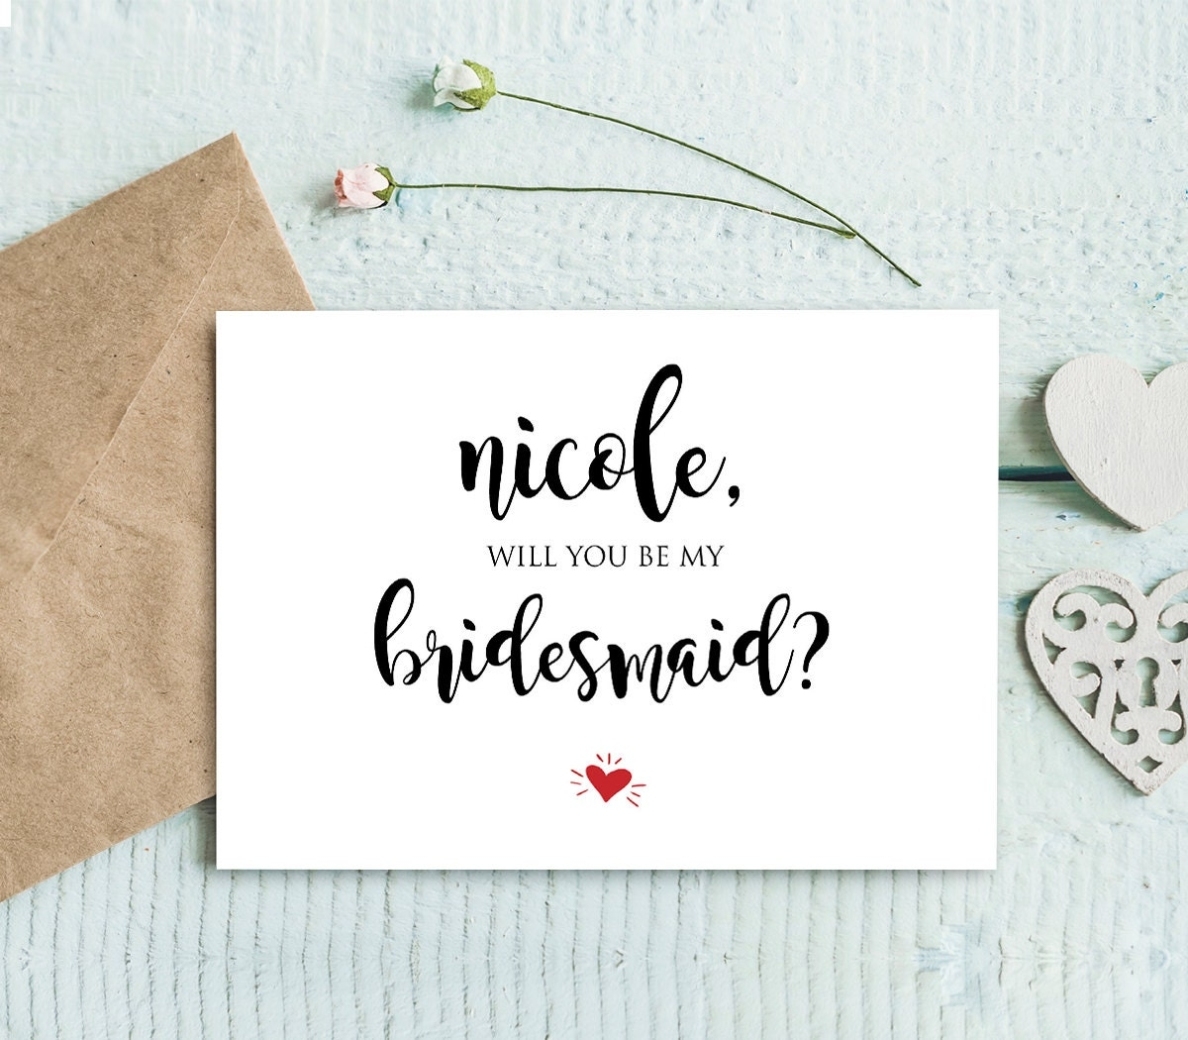 Will You Be My Bridesmaid Printable Card, Diy Ask To Be Bridesmaid, Maid Of Honor, Flower Girl With Regard To Will You Be My Bridesmaid Card Template